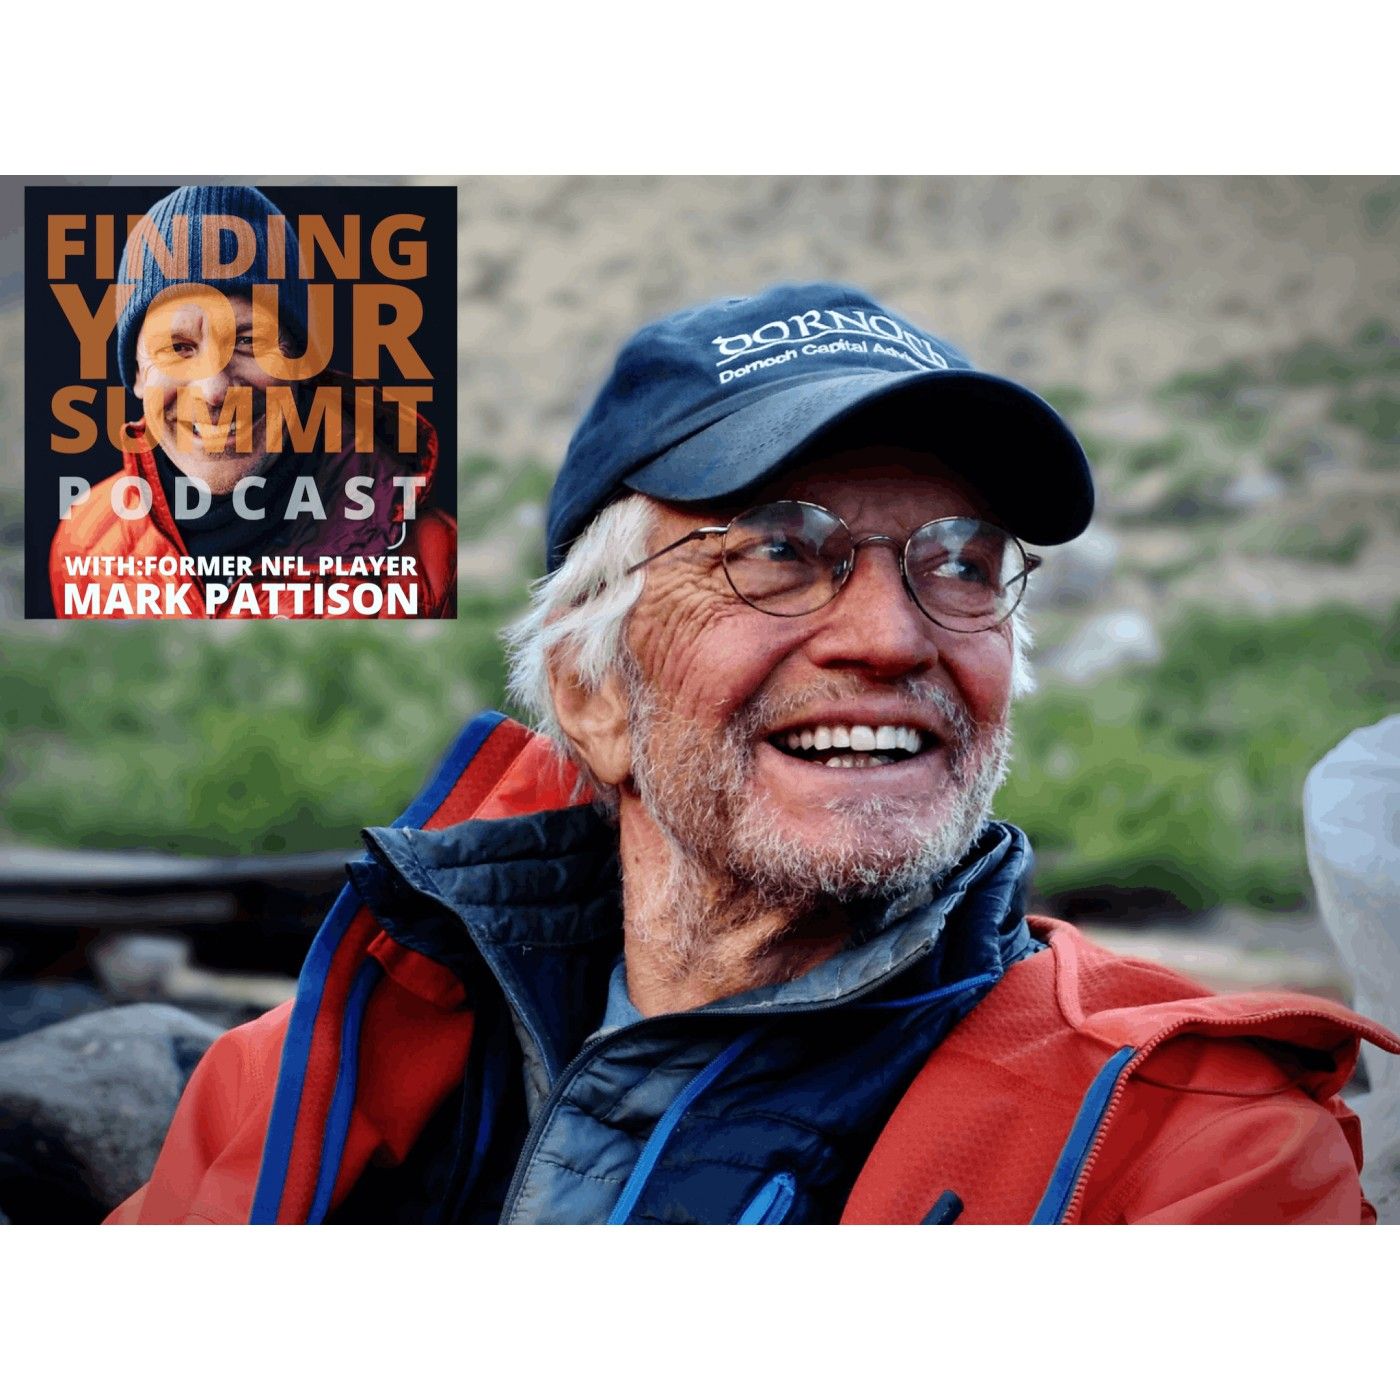 EP 211: The oldest American at 75 to ever climb Mount Everest